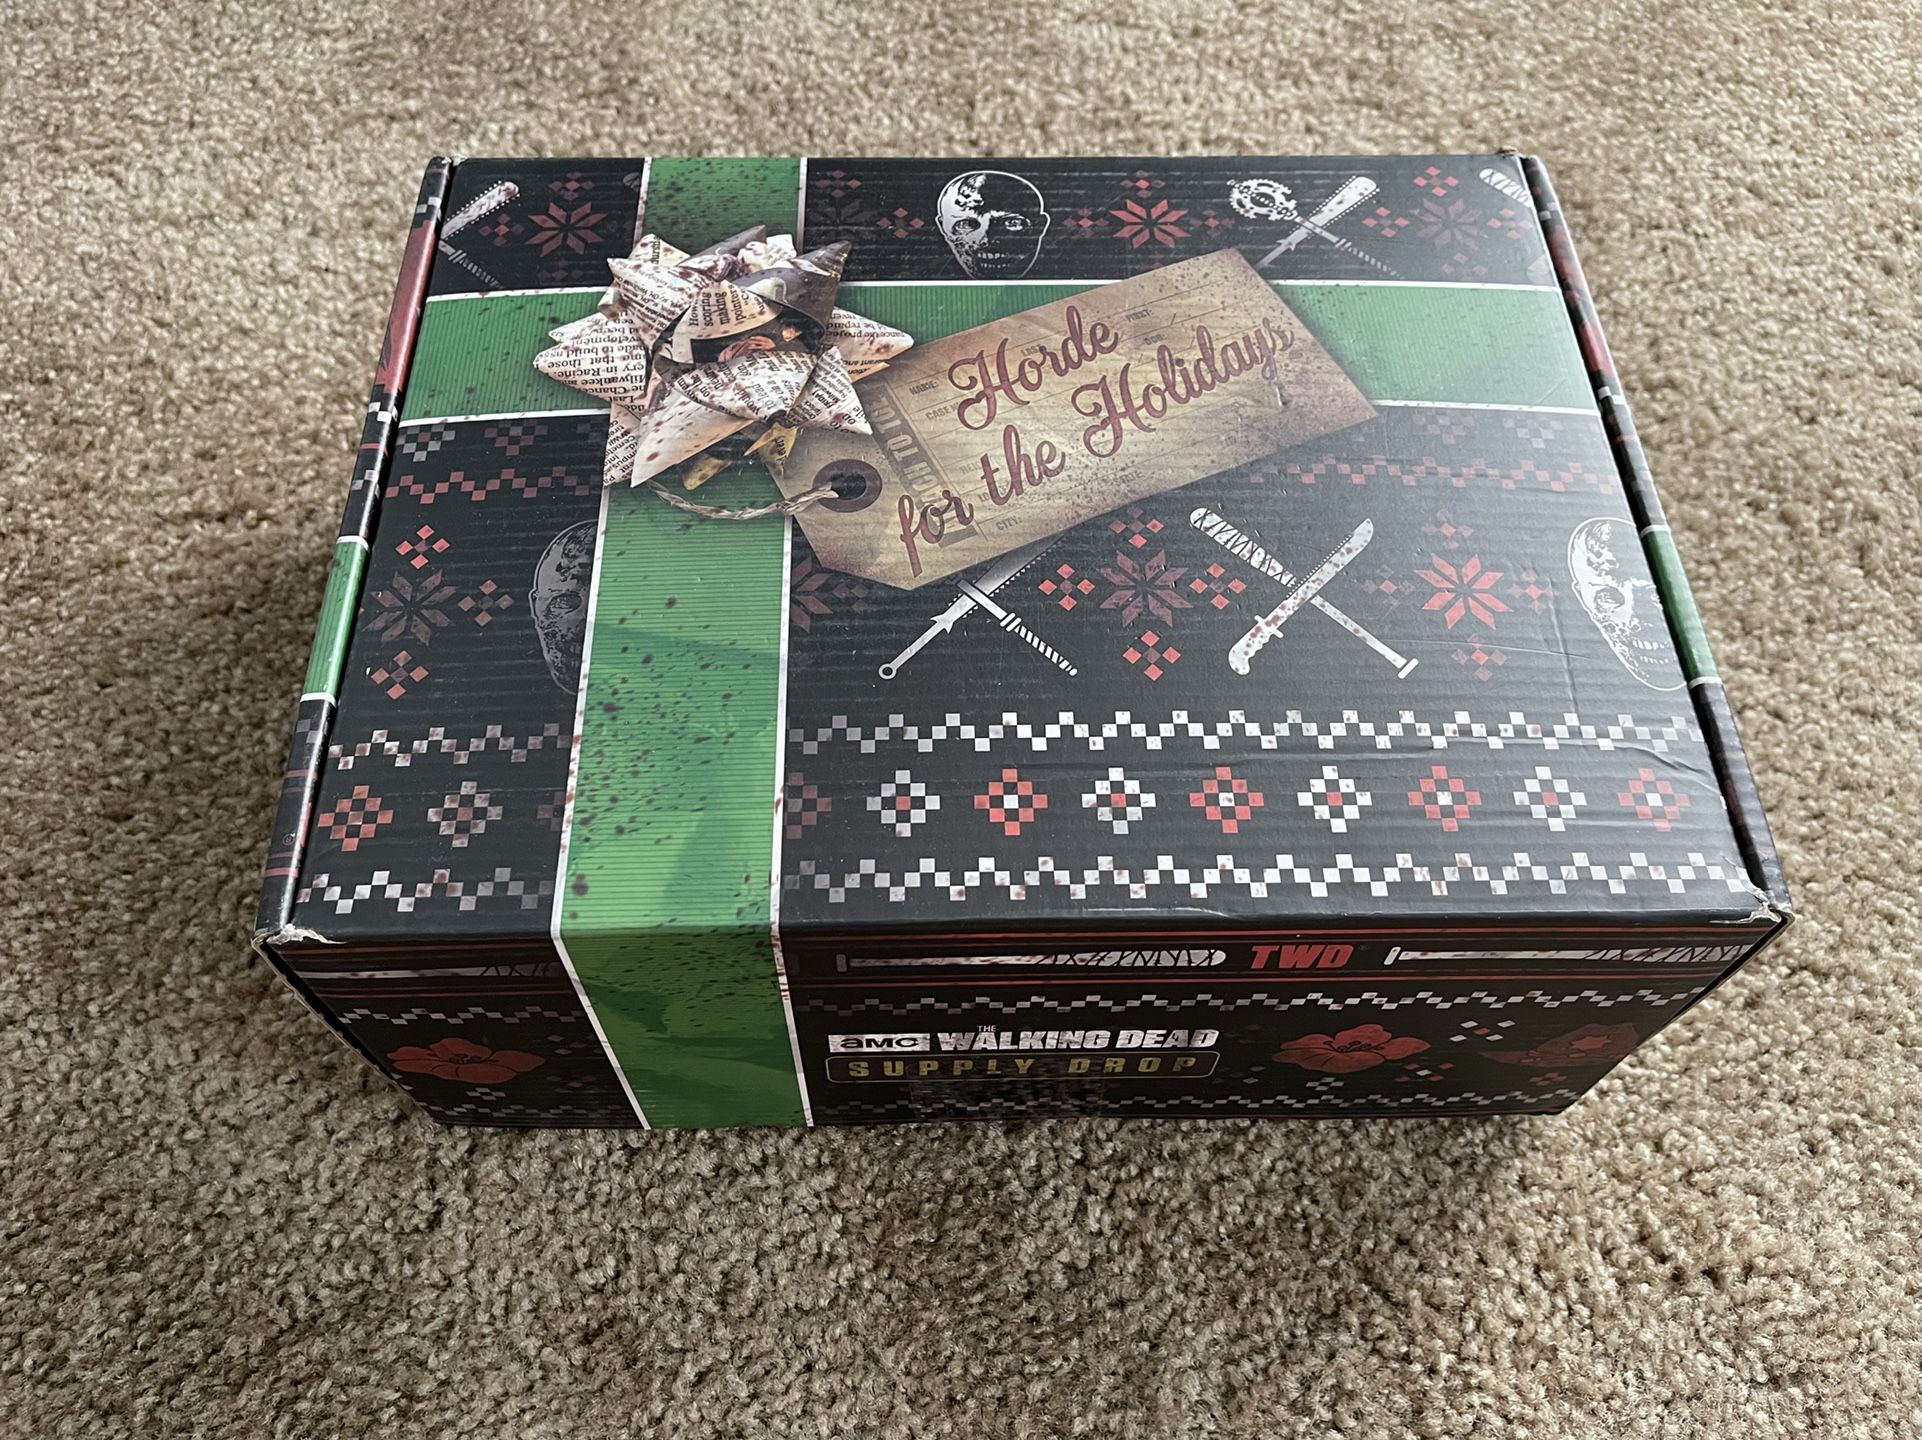 The Walking Dead Holiday Supply Drop Box